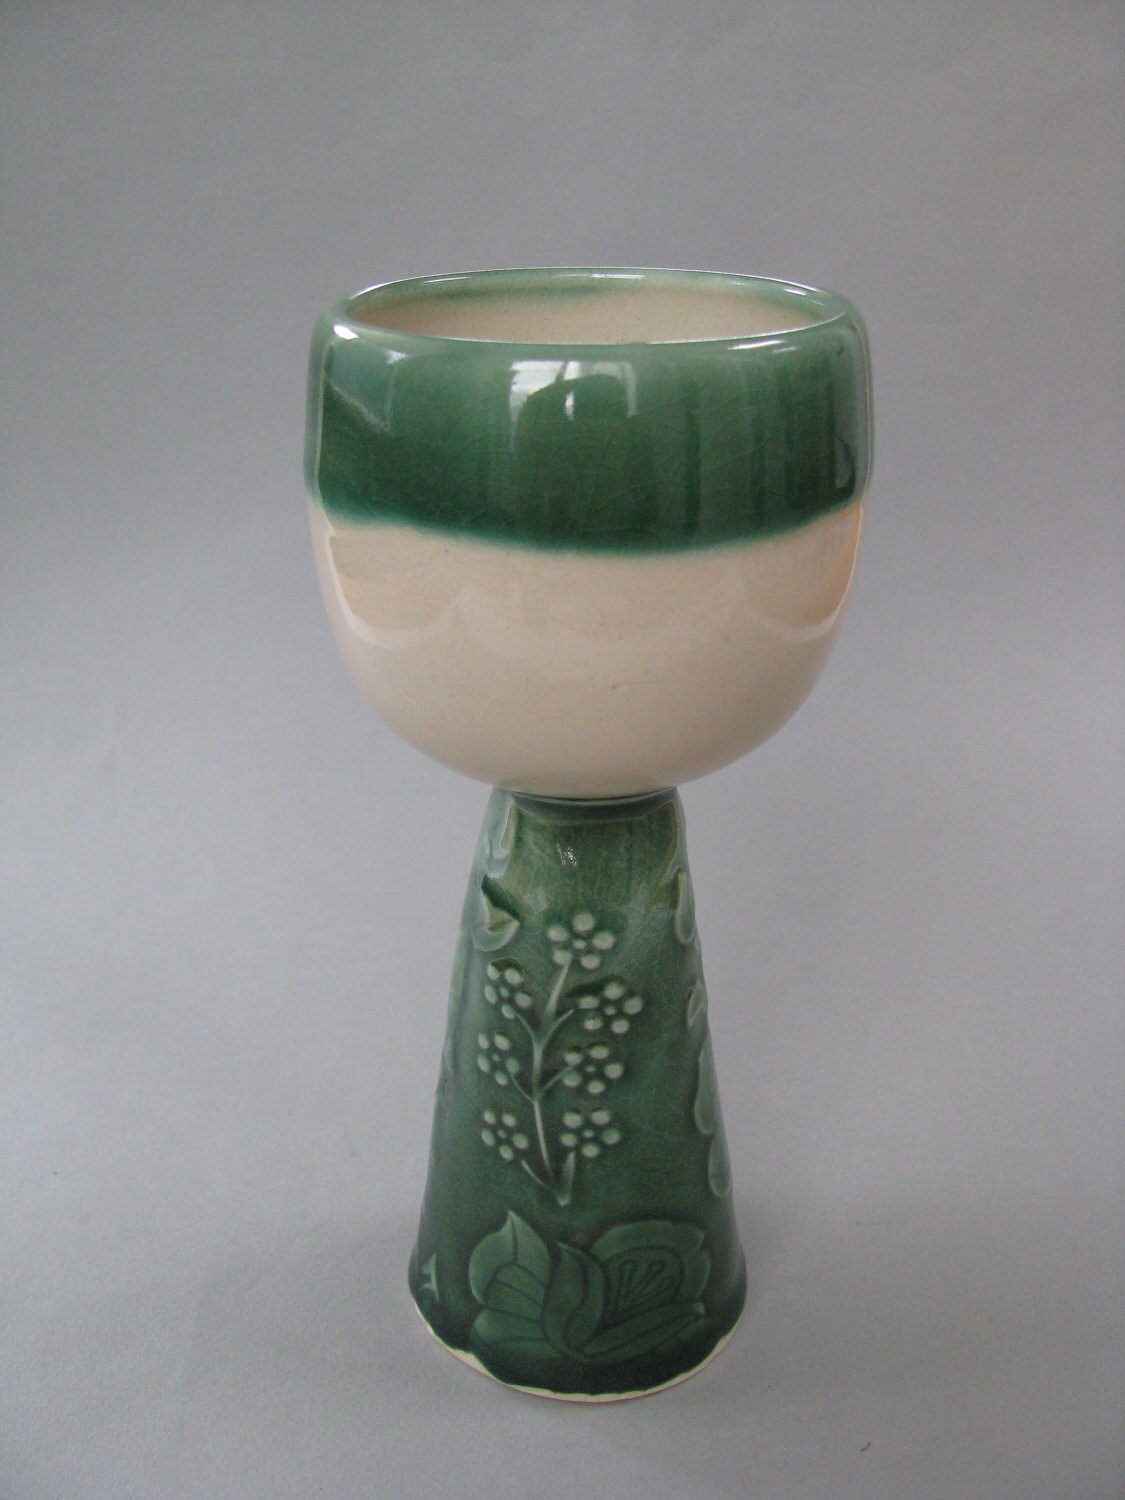 Goblet / Kiddish Cup / Miriams Cup in Green and White